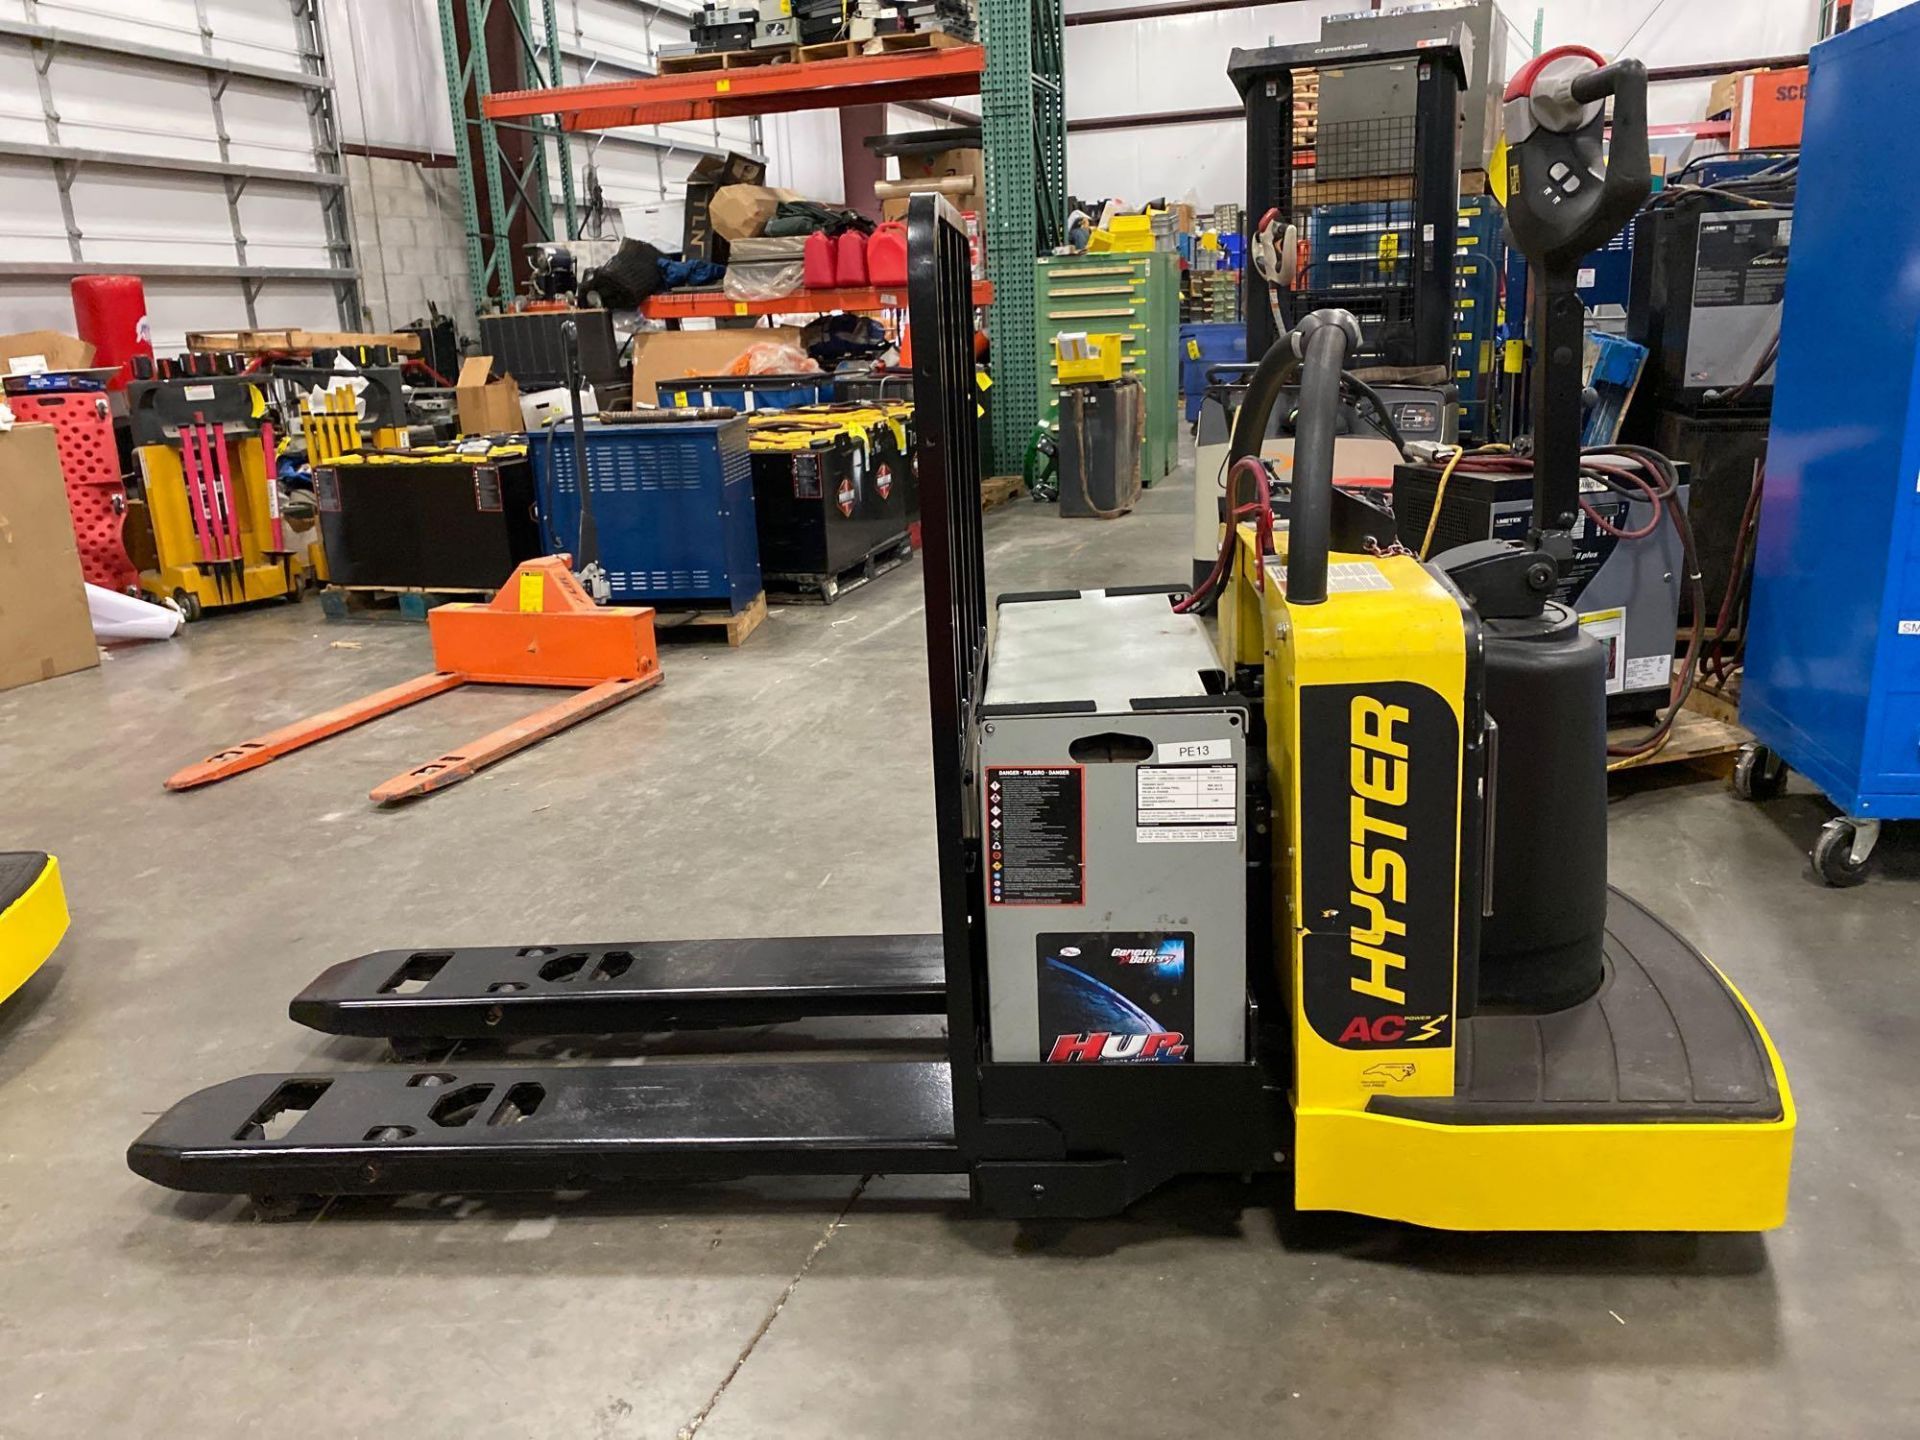 2018 HYSTER ELECTRIC PALLET JACK MODEL B60ZHD, 6,000 LB CAPACITY, 24V, 524 HOURS SHOWING, RUNS AND O - Image 4 of 8